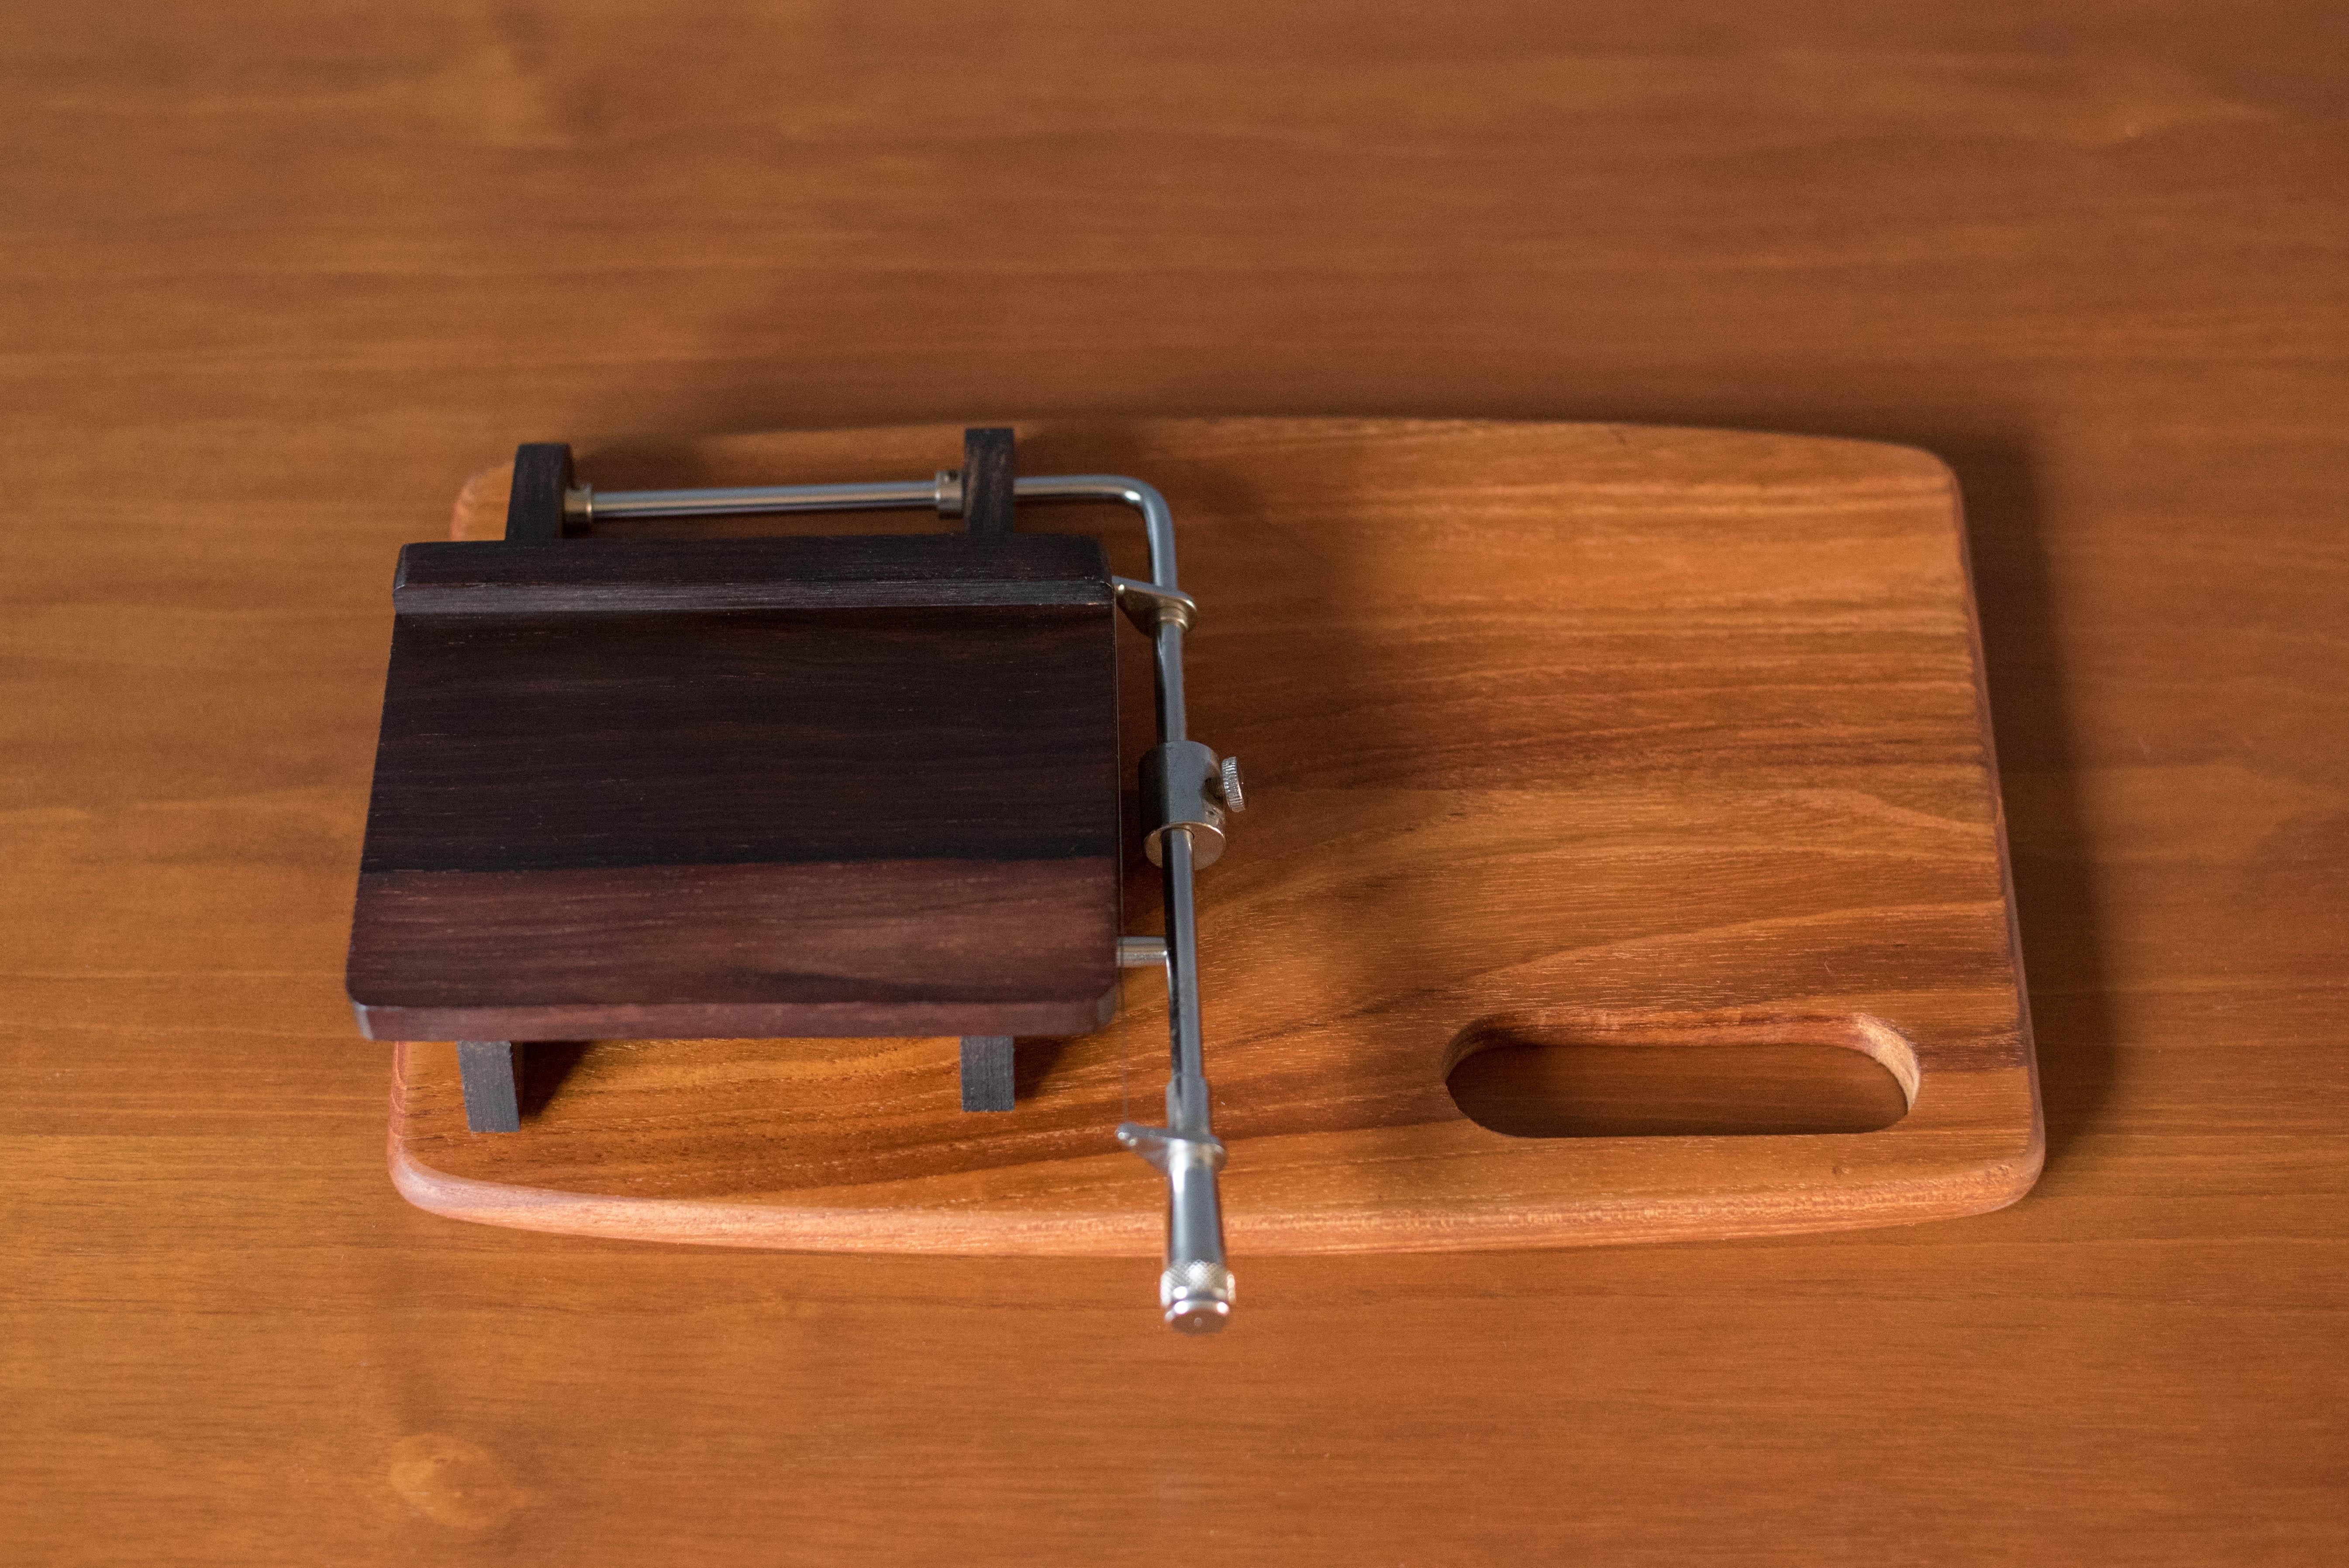 Mid century modern 'Oste-Mik' cheese slicing board manufactured by Andreas Hansen, circa 1960's. This unique piece is made with a solid teak serving tray with a contrasting rosewood slicer board and metal wire cutter. Great for entertaining and